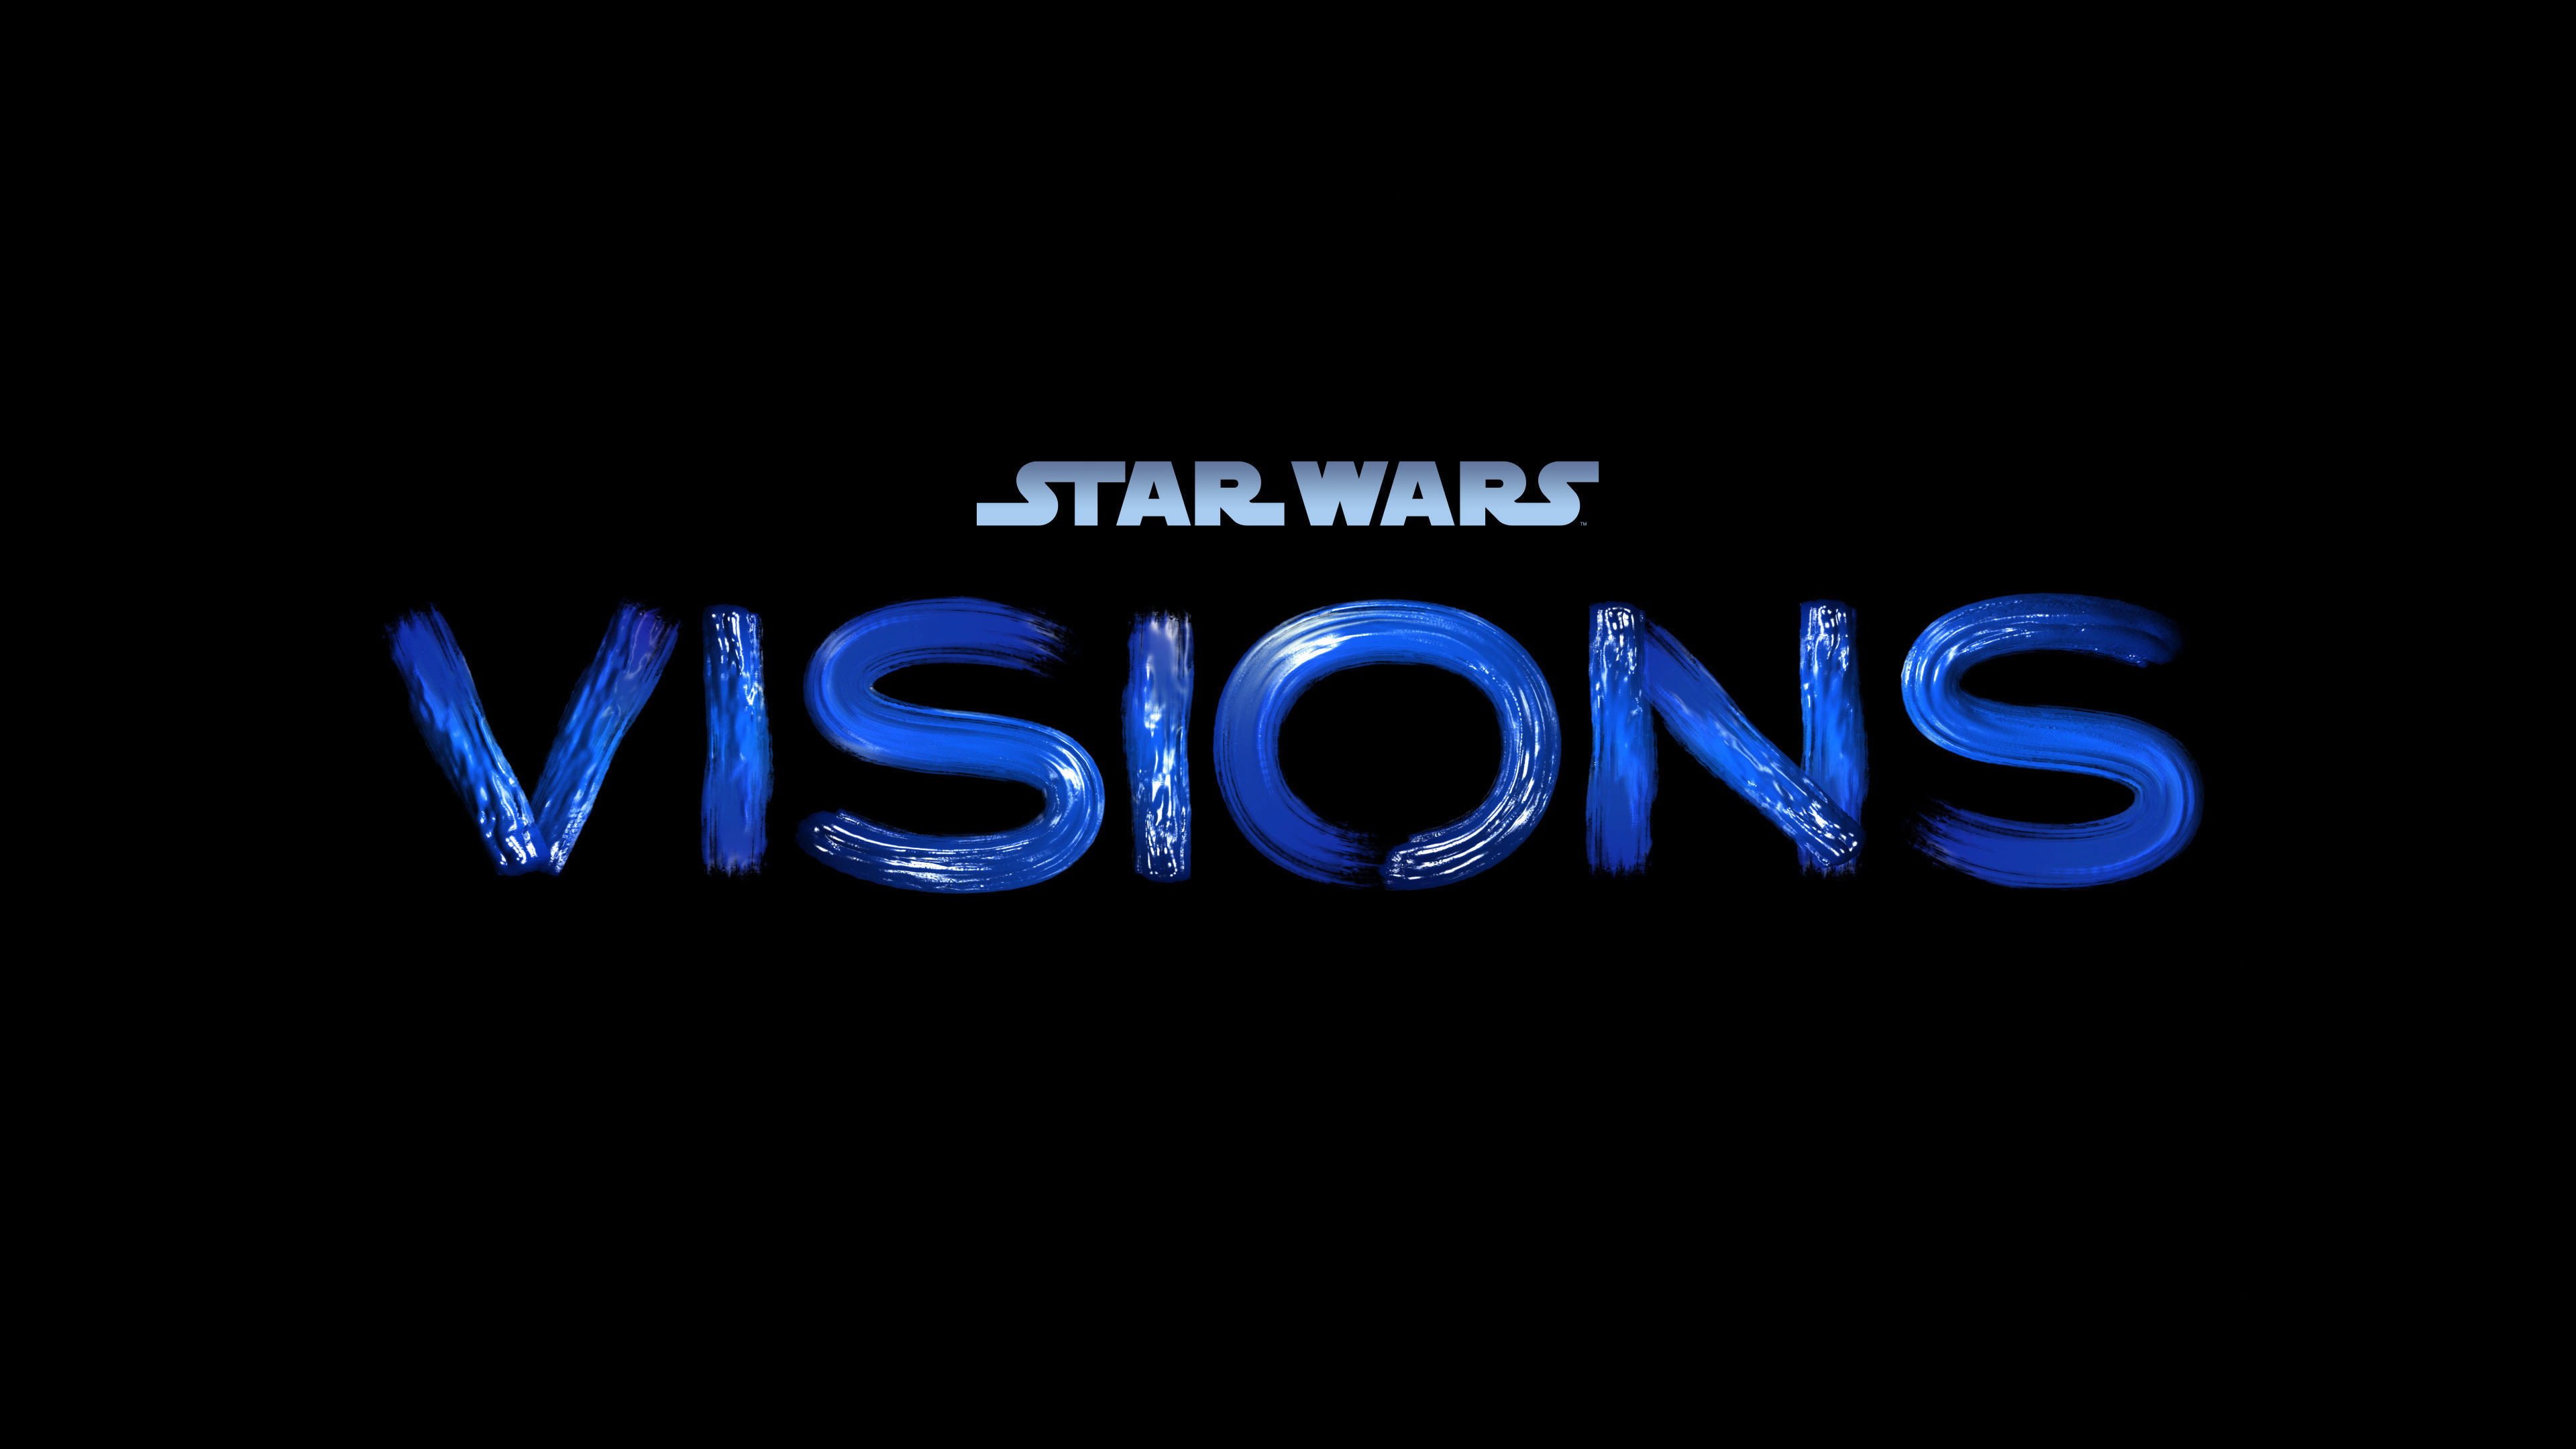 “Star Wars Visions” Review: Every Episode is One Word… Visionary!